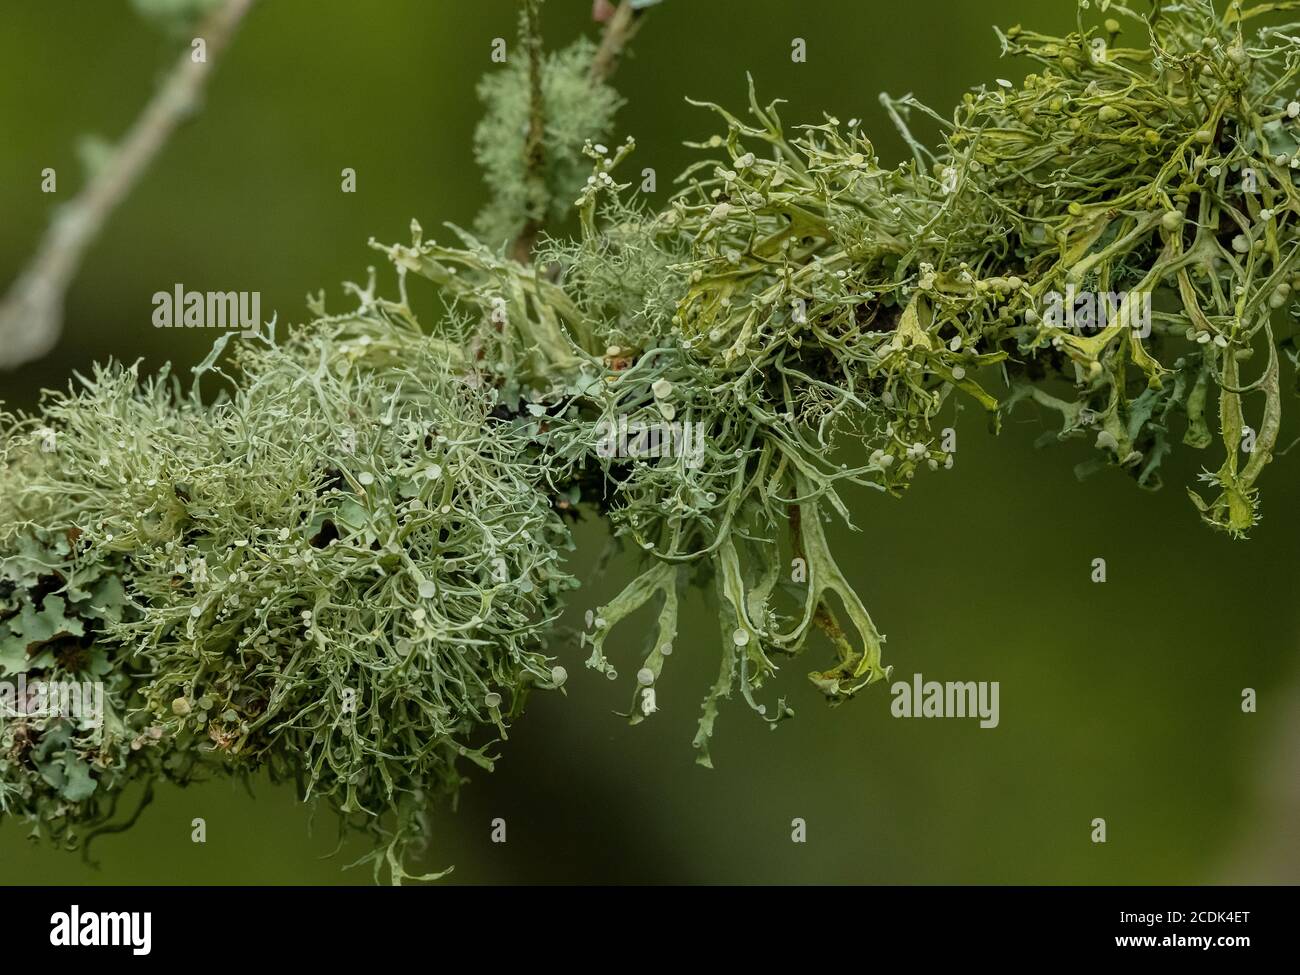 luxuriant lichen growth on branch, particularly Ramalina fastigiata, Usnea spp etc. Western coastal area, with clean air. Stock Photo